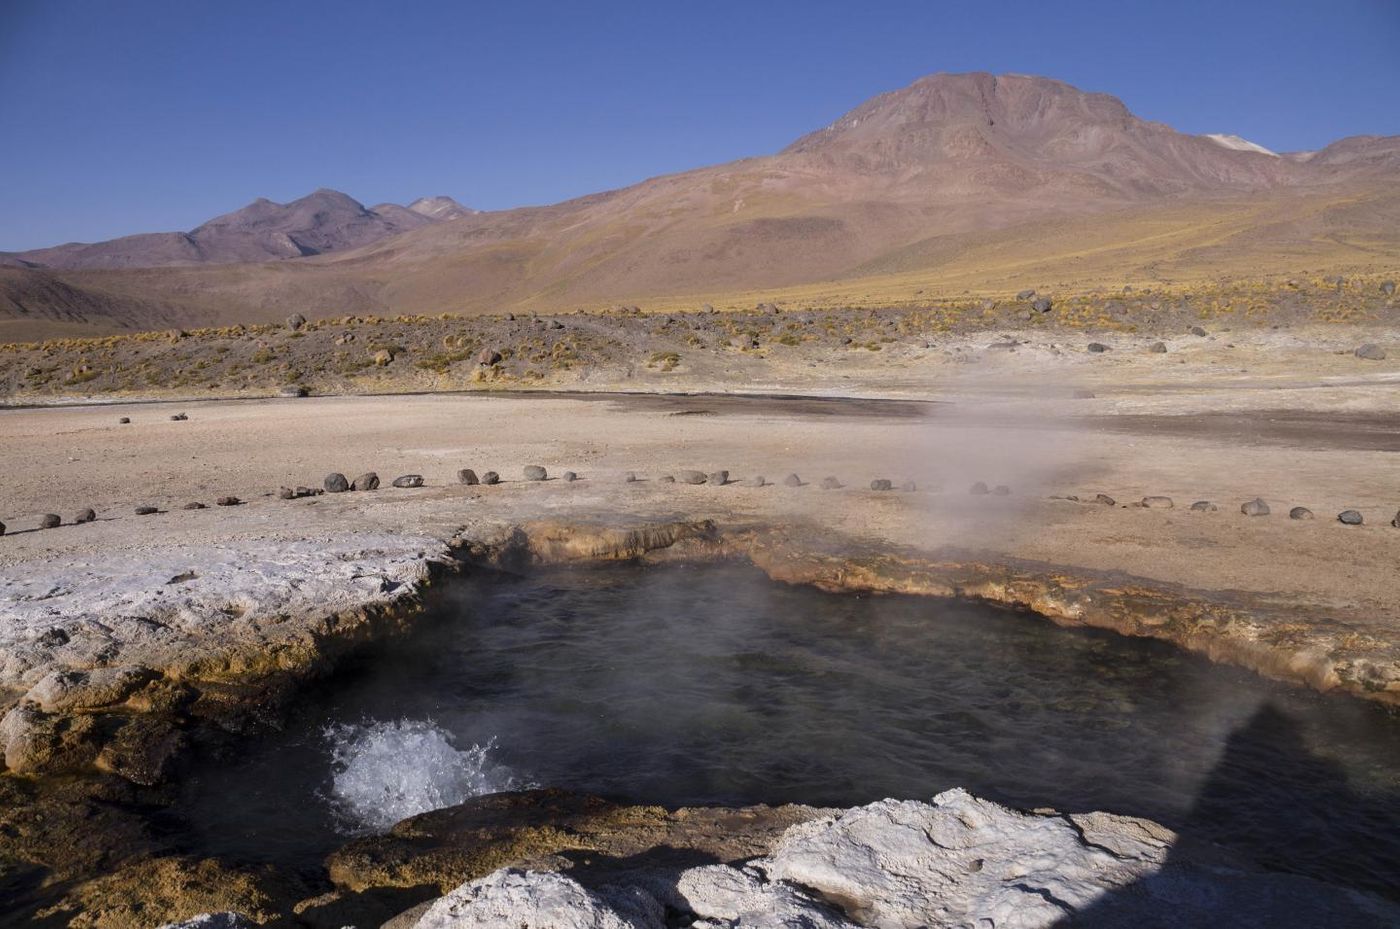 Bacteria were collected from this hot spring in the El Tatio region in northern Chile. / Credit: Yaroslav Ispolatov